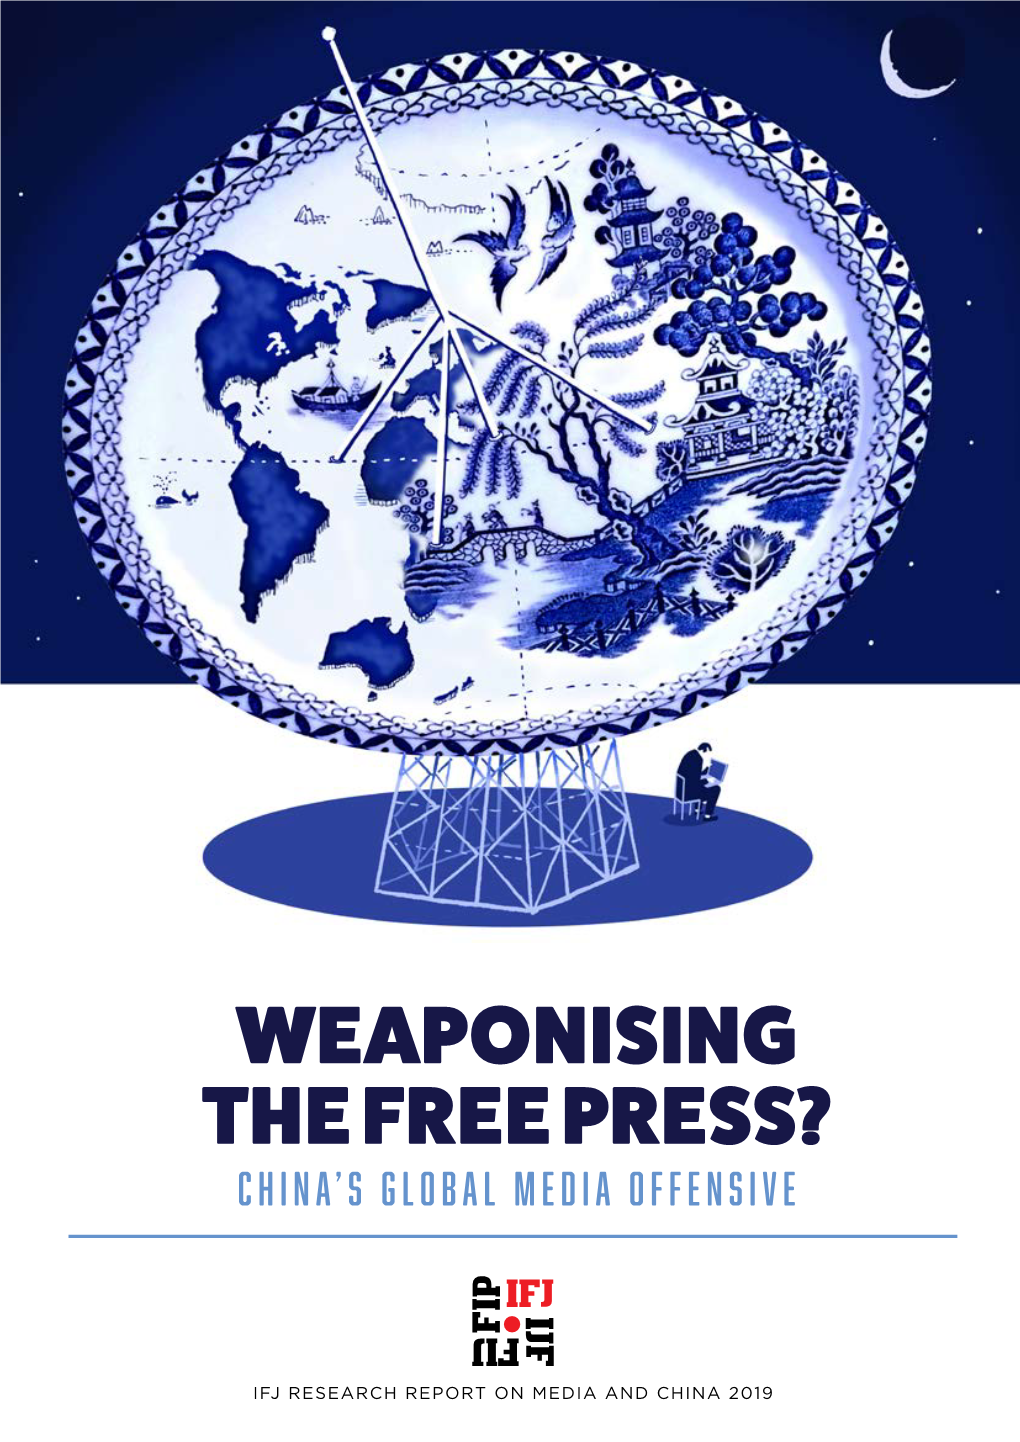 Weaponising the Free Press? China's Global Media Offensive